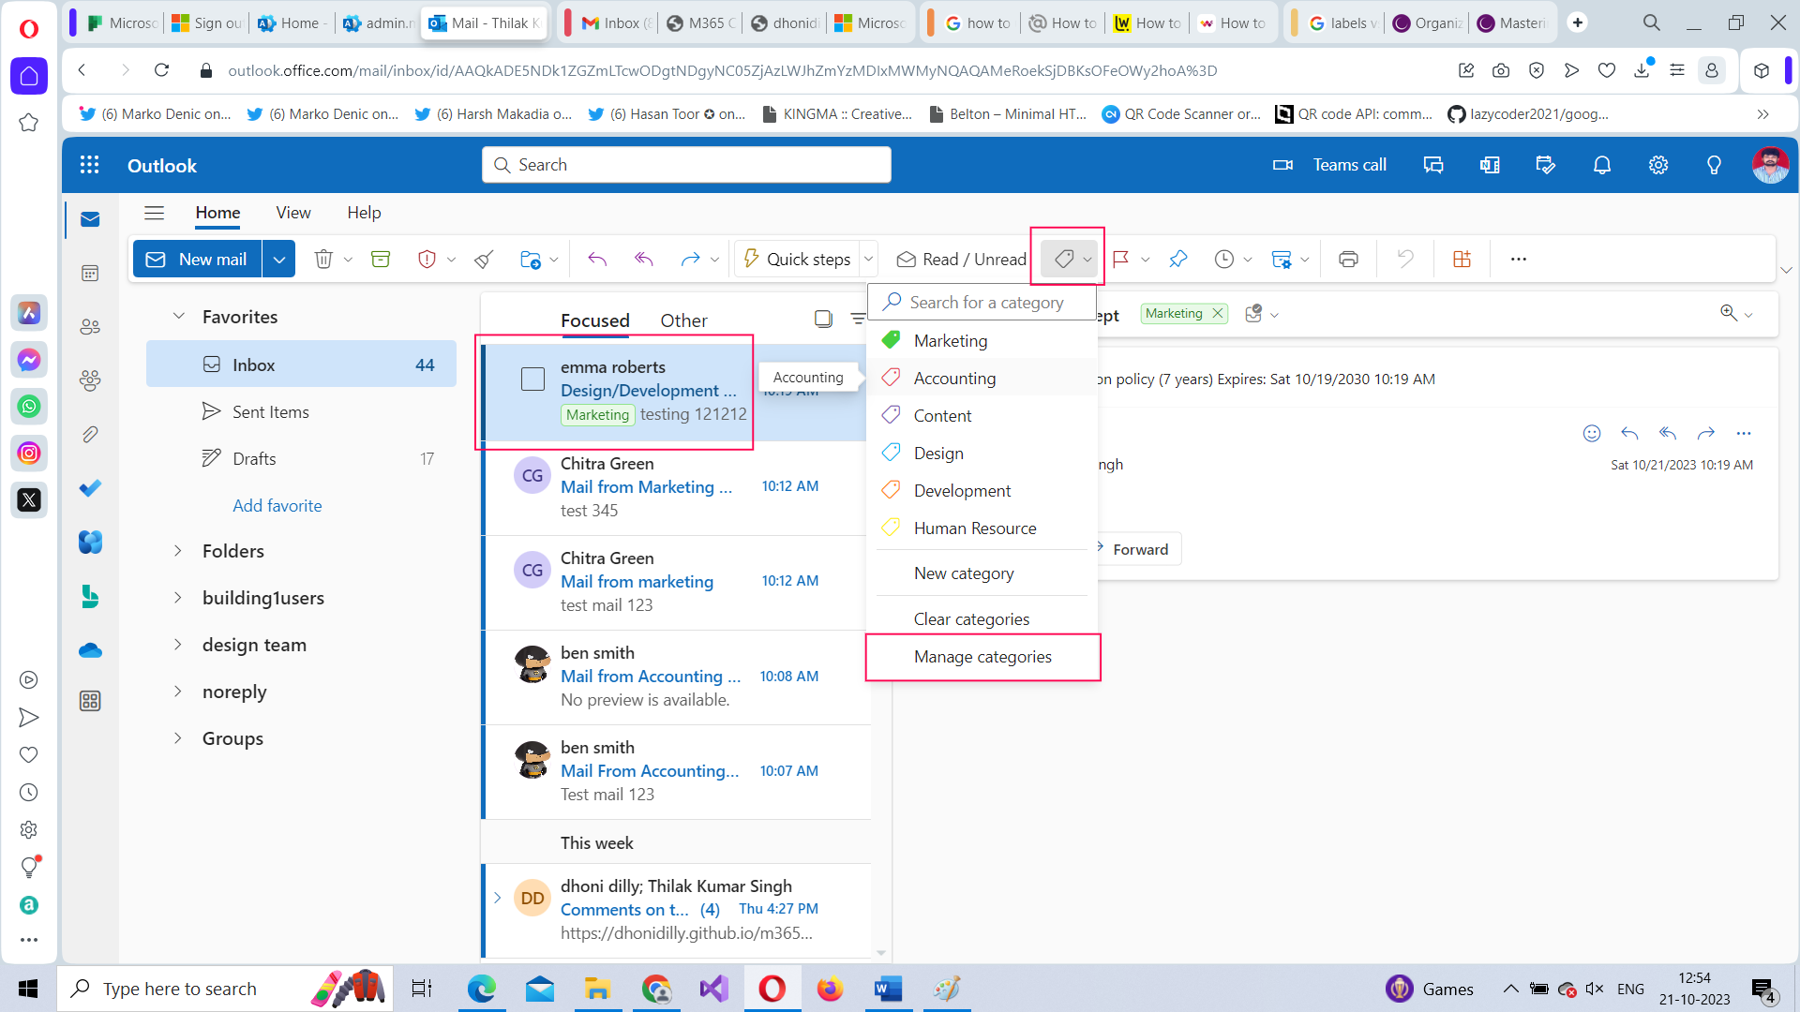 This screenshot shows how you can access the manage categories option by selecting the icon in Microsoft 365 Outlook on the web.